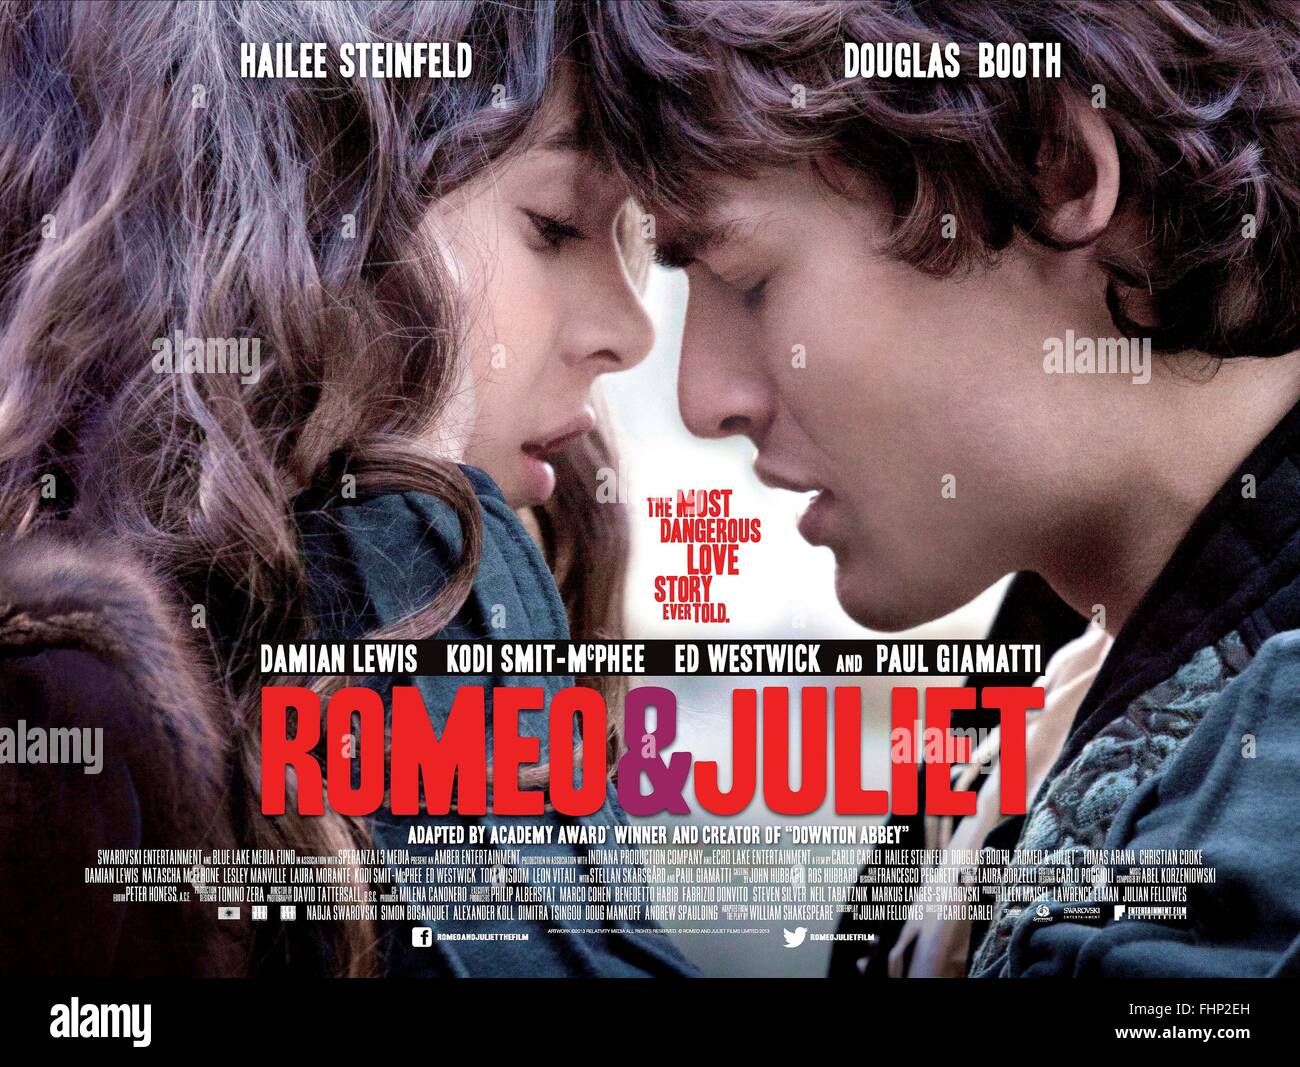 MOVIE POSTER ROMEO AND JULIET (2013 Stock Photo, Royalty Free Image